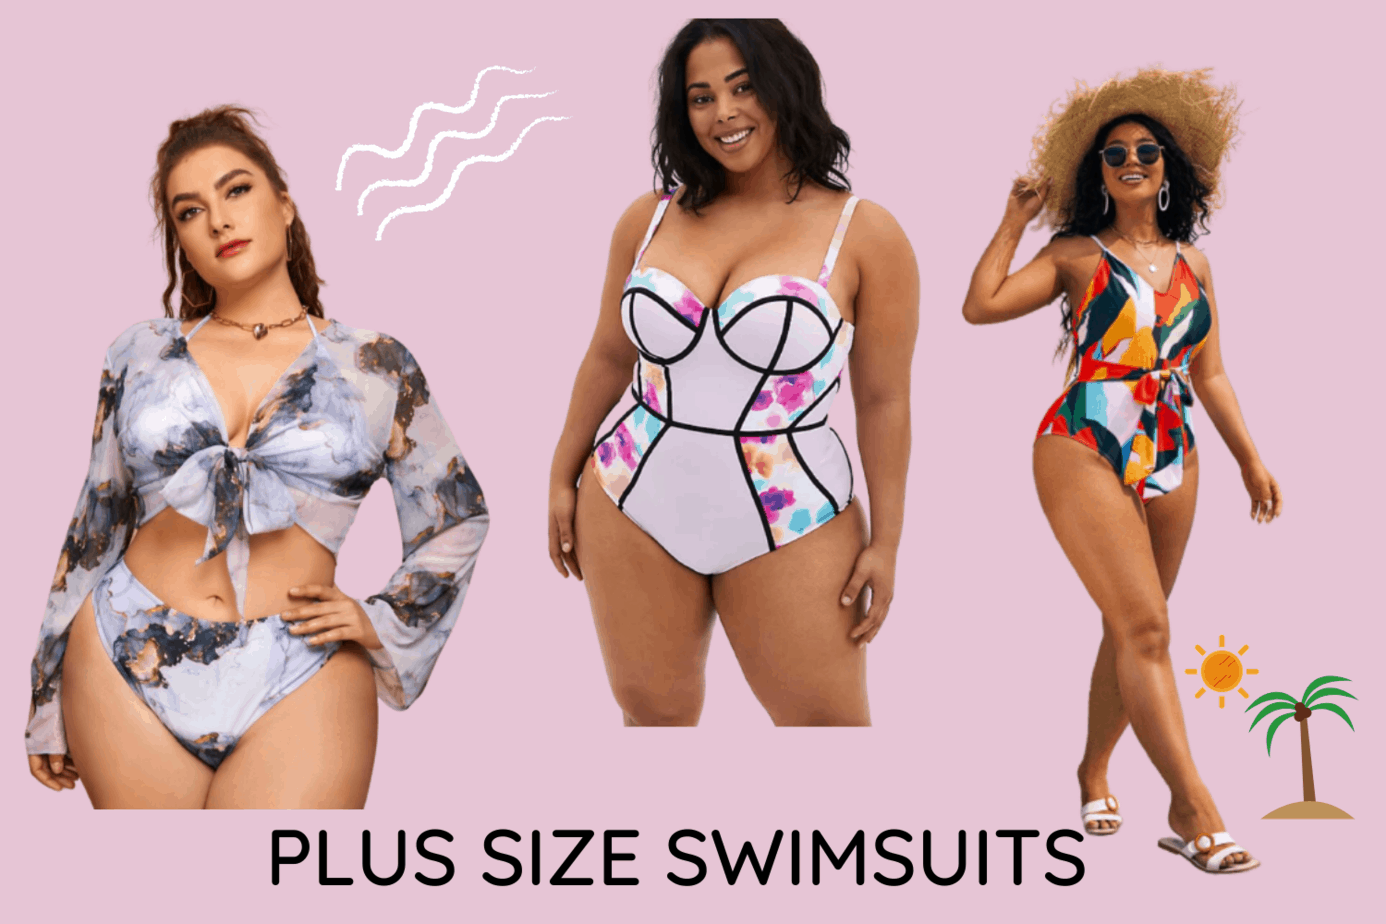 21 Best Swimsuits For Plus Size That Are Very Cute